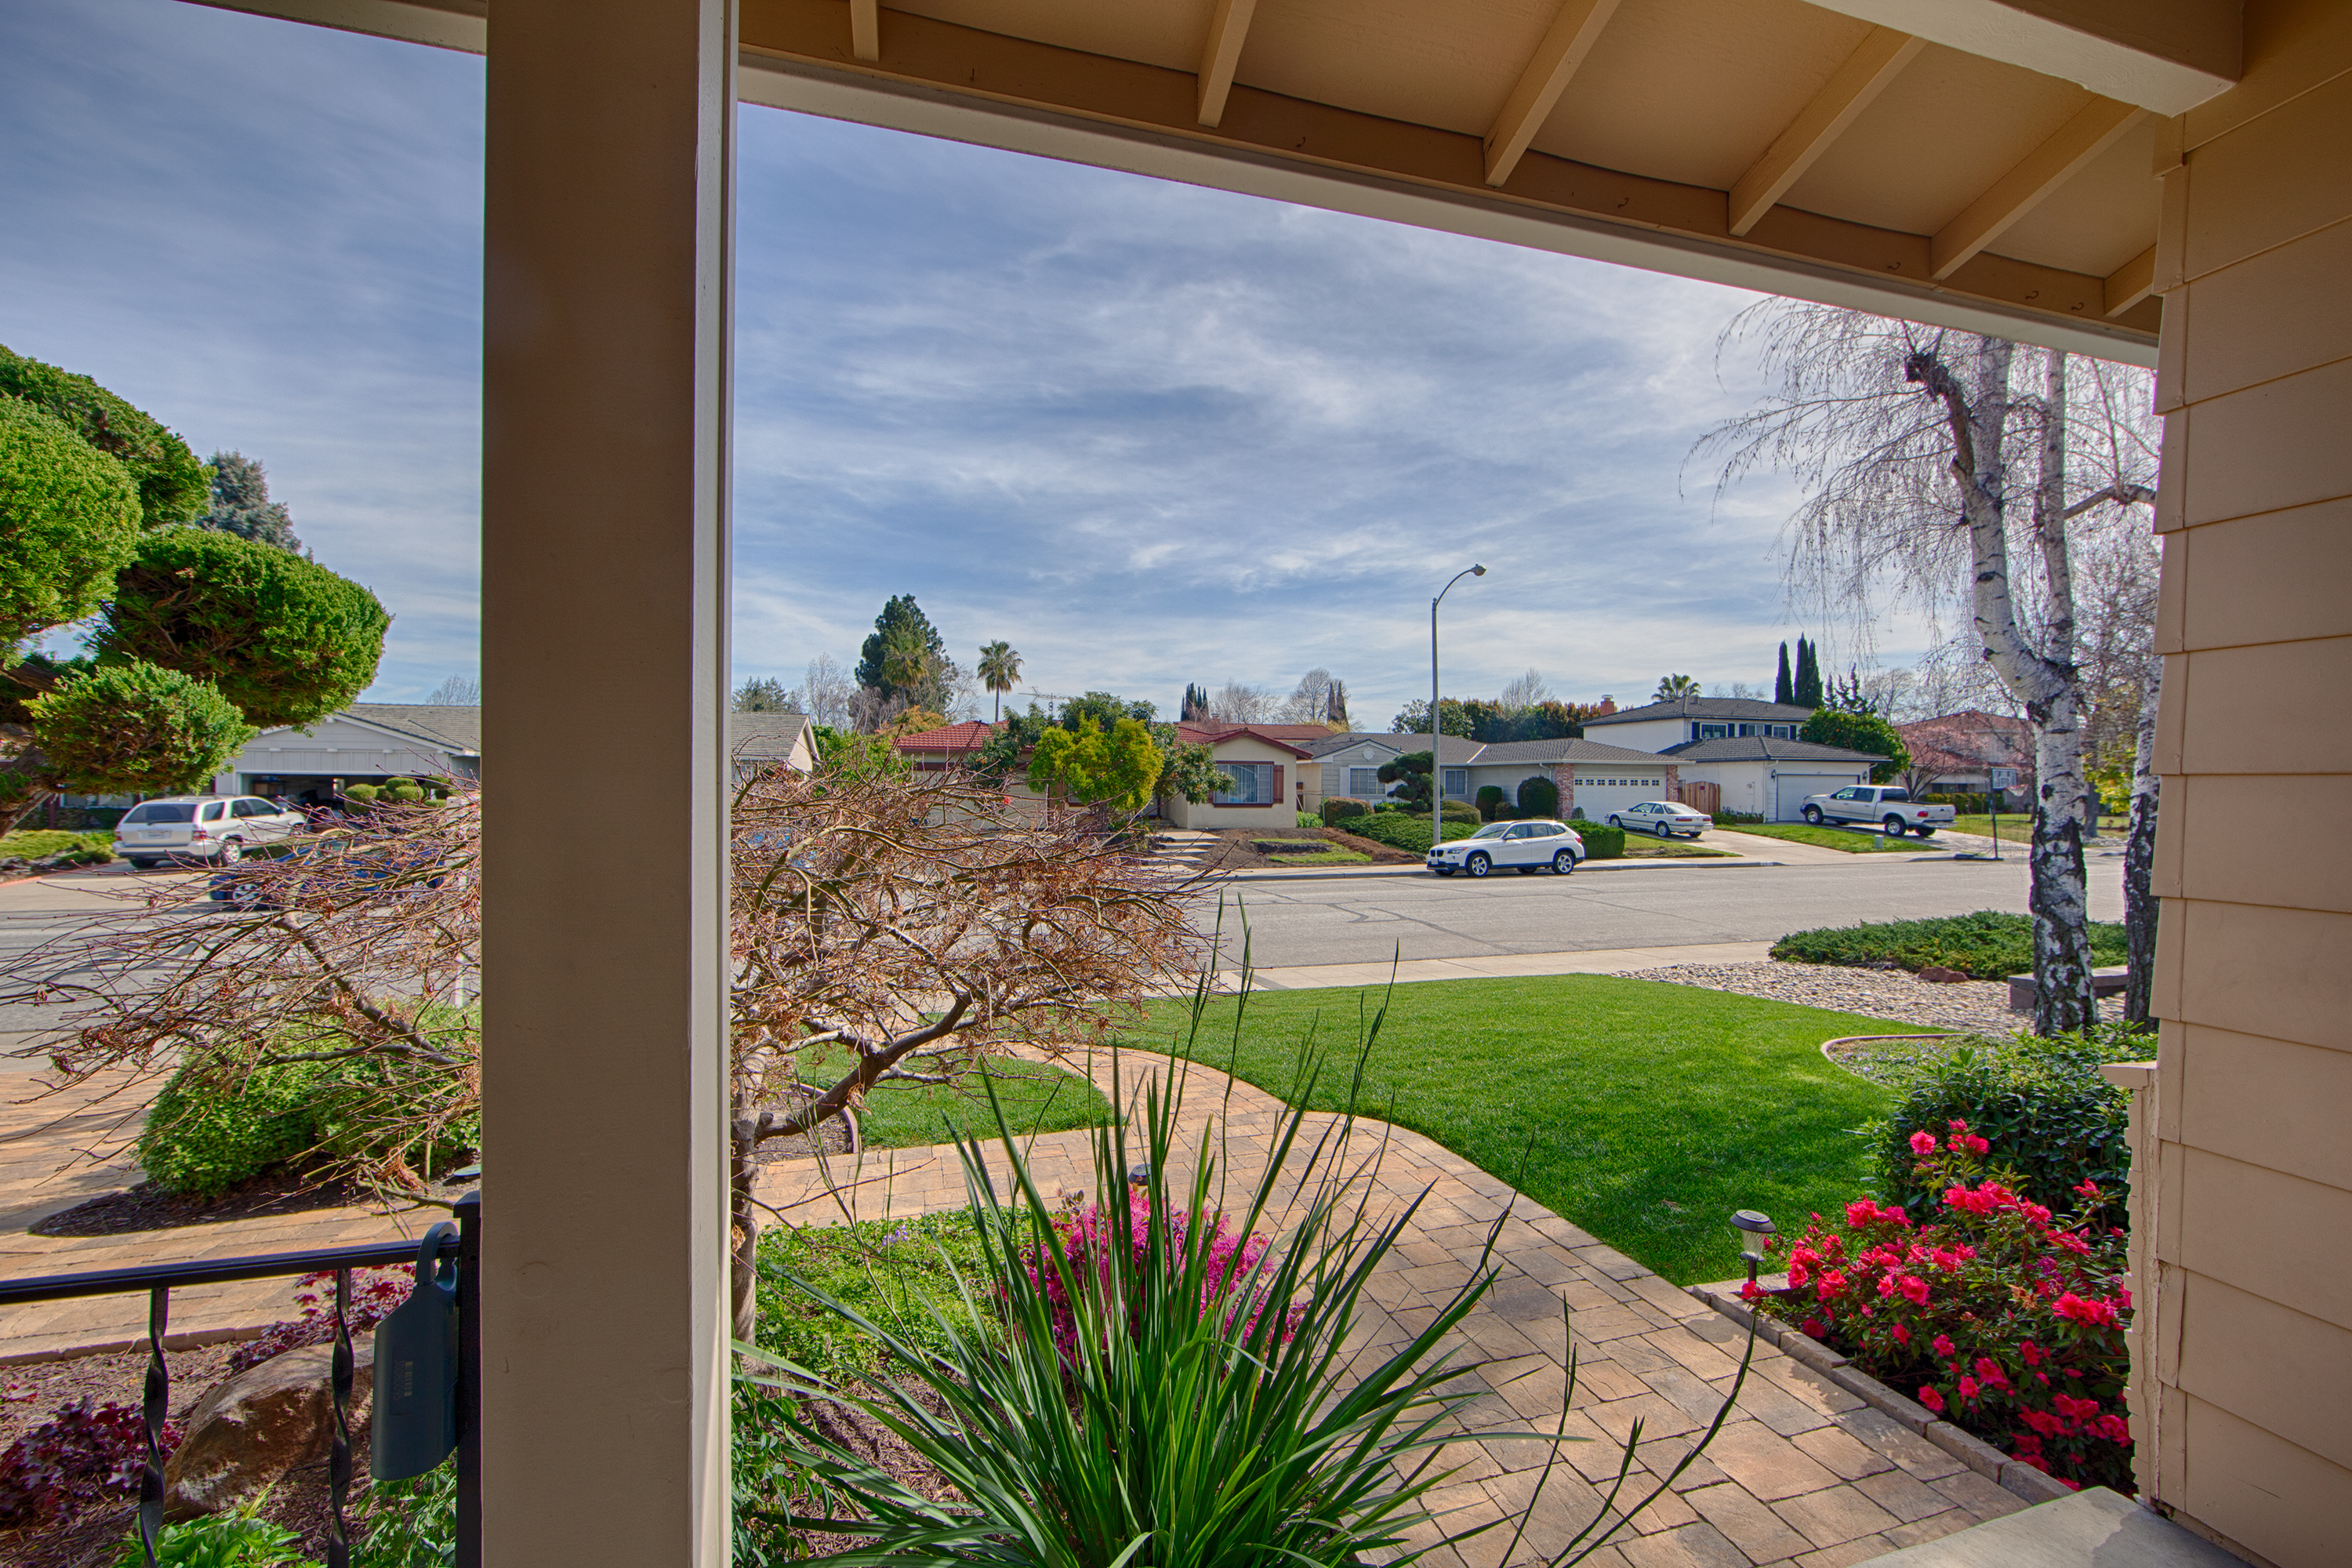 639 Spruce Dr, Sunnyvale 94086 - Front Porch View (A)